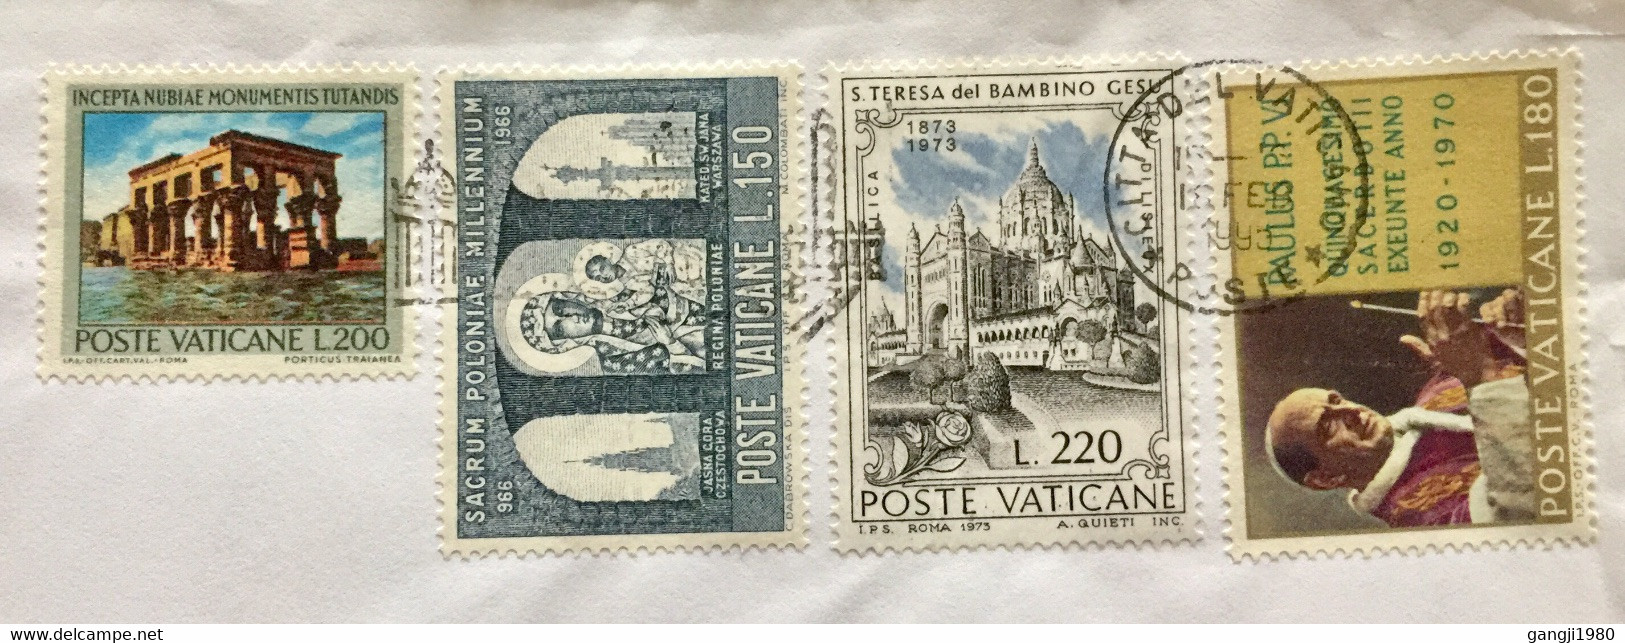 VATICAN 1995, MILITARY OF MALTA USED COVER !!! 4 STAMPS USED POPE ,VIEW OF VATICAN,MOTHER & CHILD EARLY RUIN, - Covers & Documents